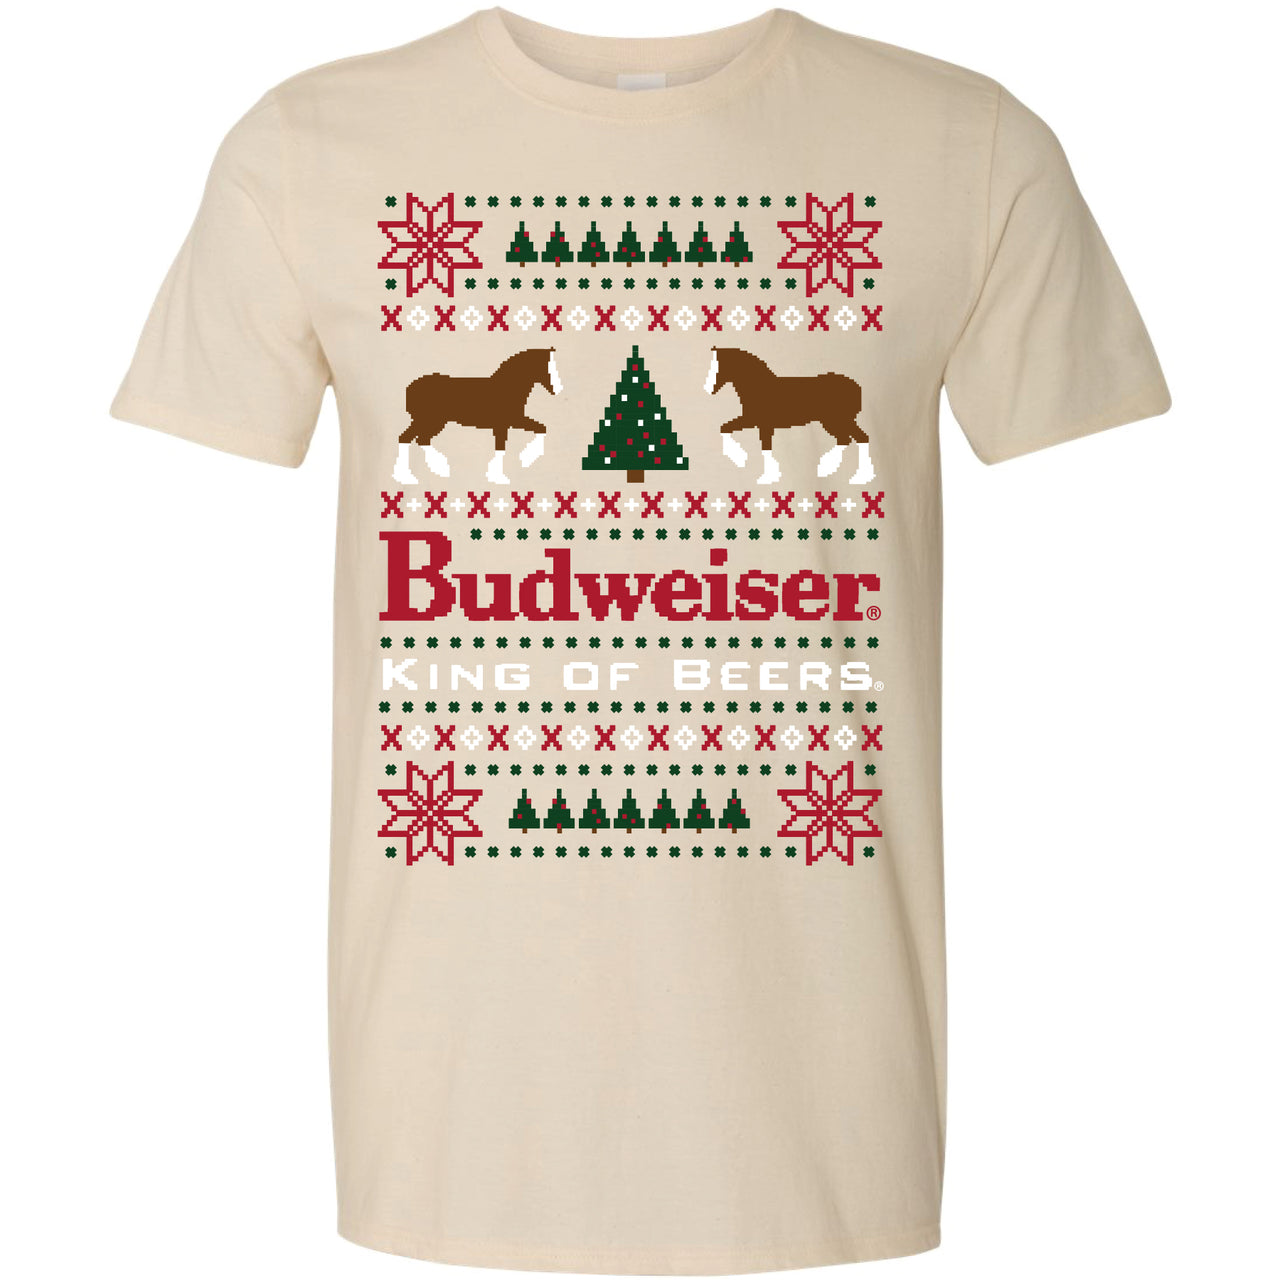 Budweiser Clydesdales - Ugly Sweater T-Shirt